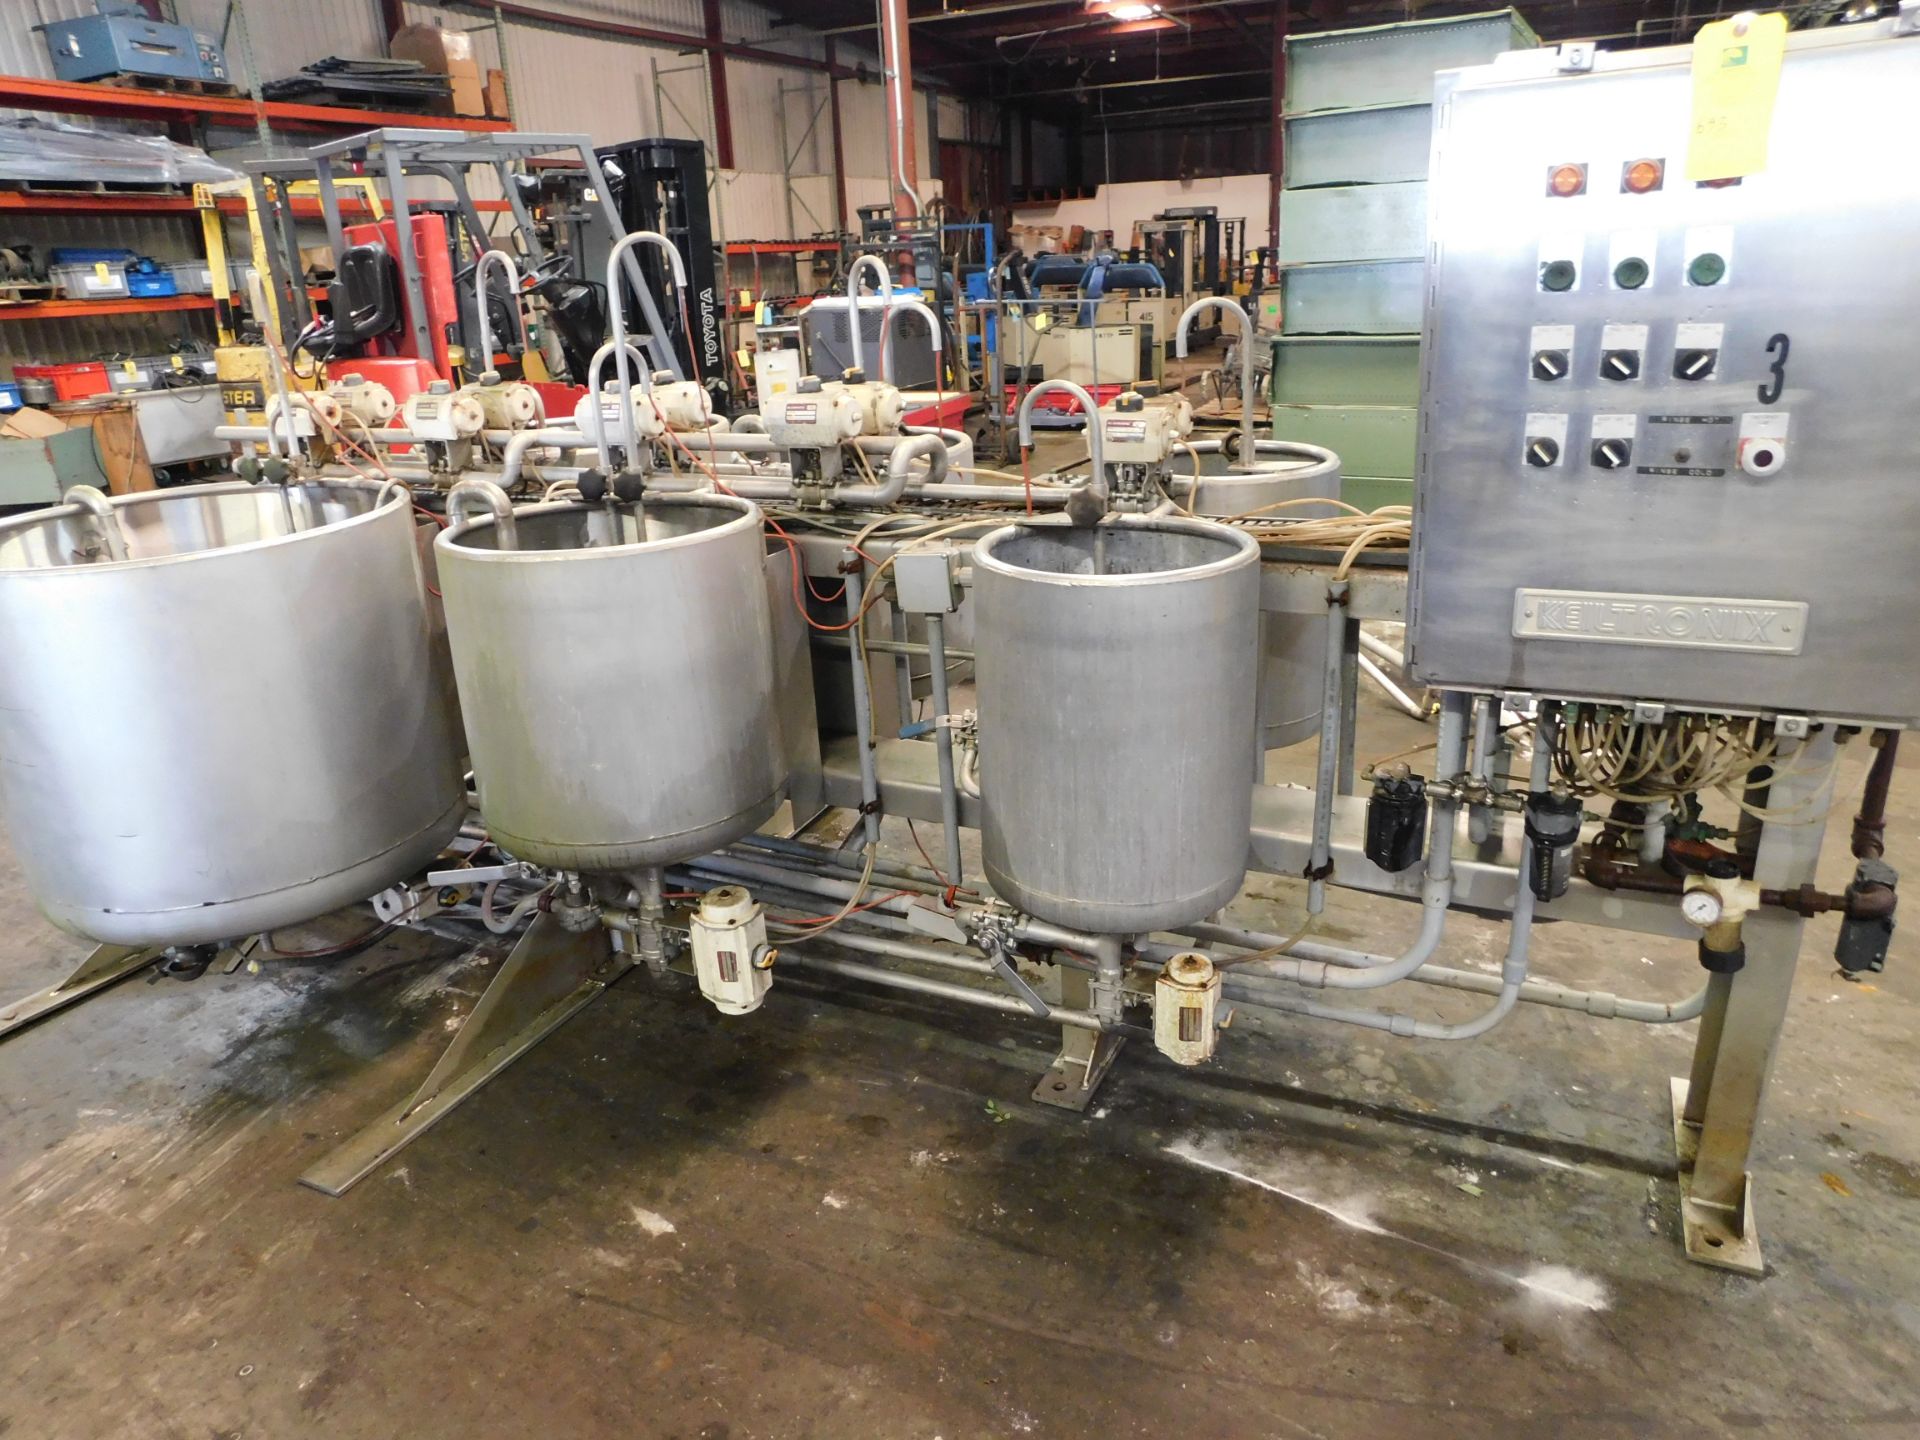 Keltronix Chemical Mixing System w/ (6) Stainless Steel Tanks: 32 inches Diameter, 28 inches Height